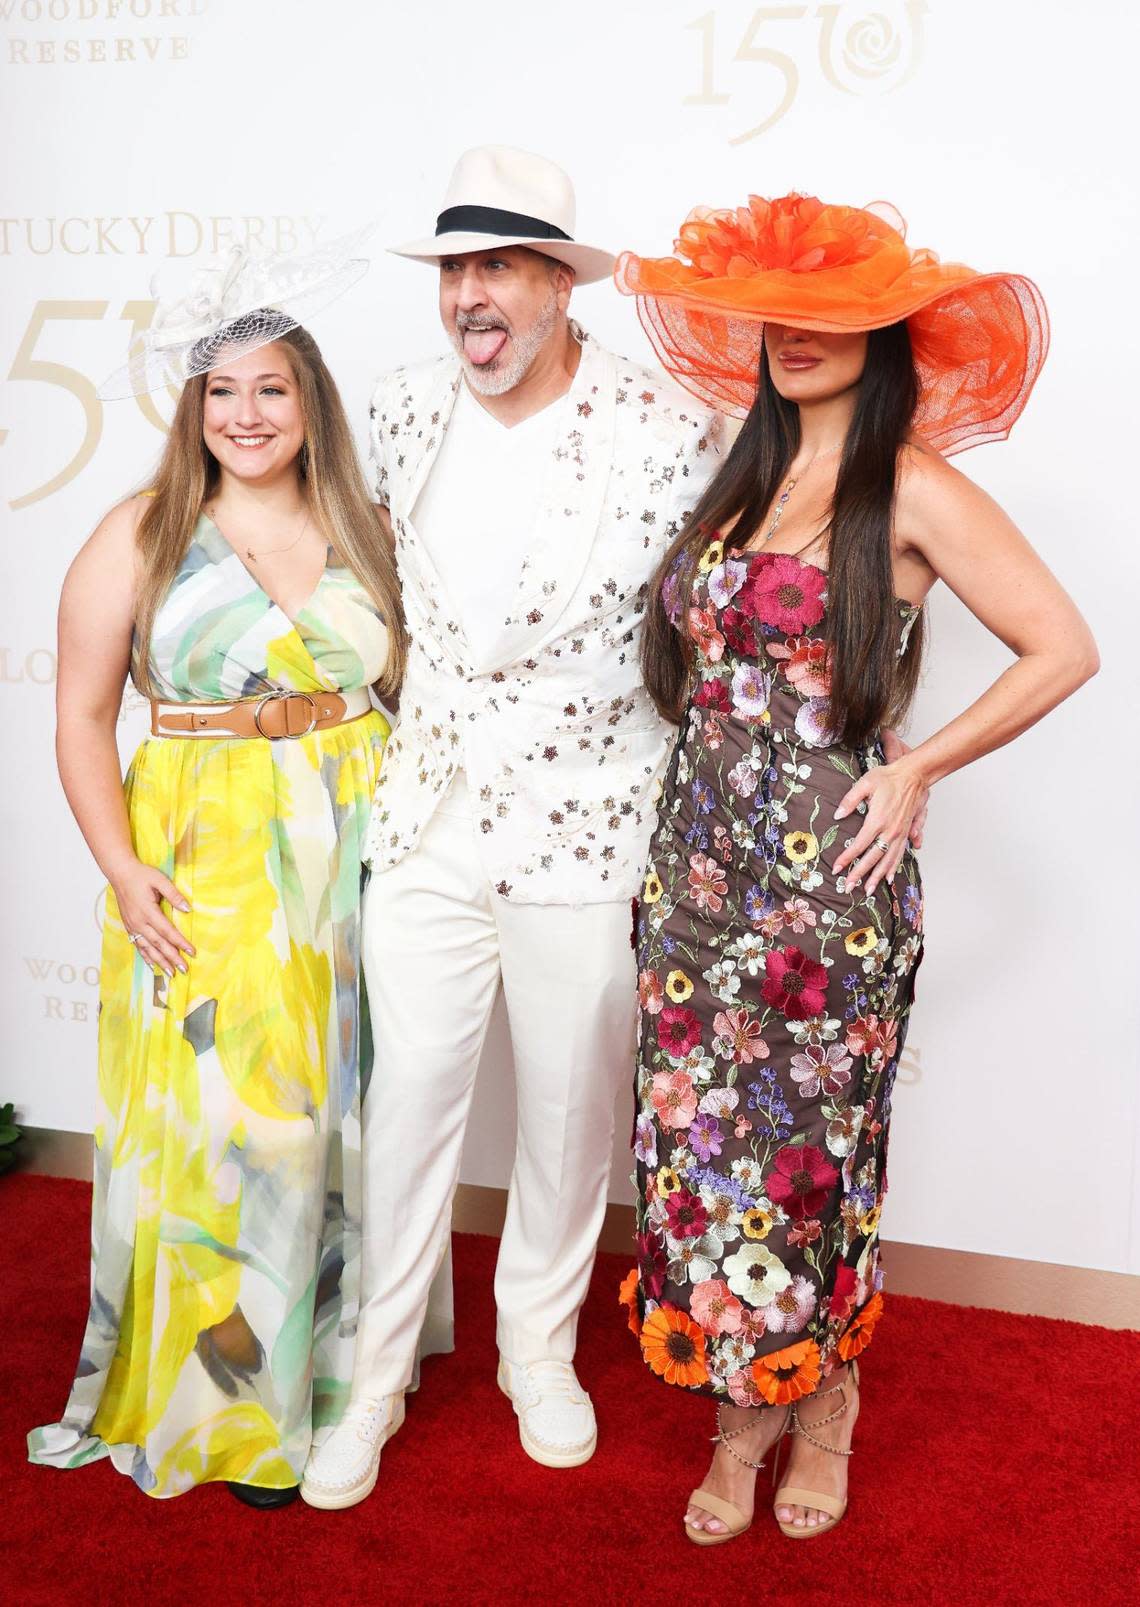 Joey Fatone poses for a photo on the red carpet at the Kentucky Derby on Saturday, May 4, 2024, at Churchill Downs in Louisville, Kentucky.